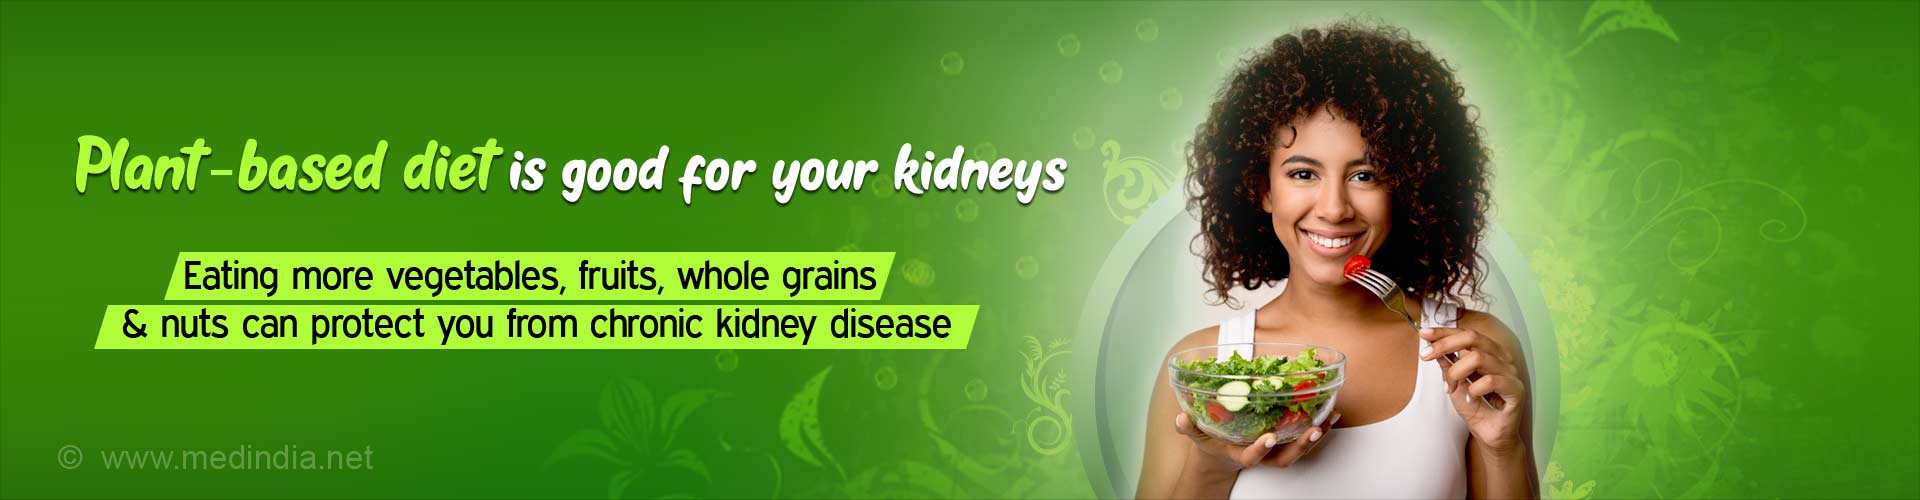 Plant-based diet is good for your kidneys. Eating more vegetables, fruits, whole grains and nuts can protect you from chronic kidney disease.